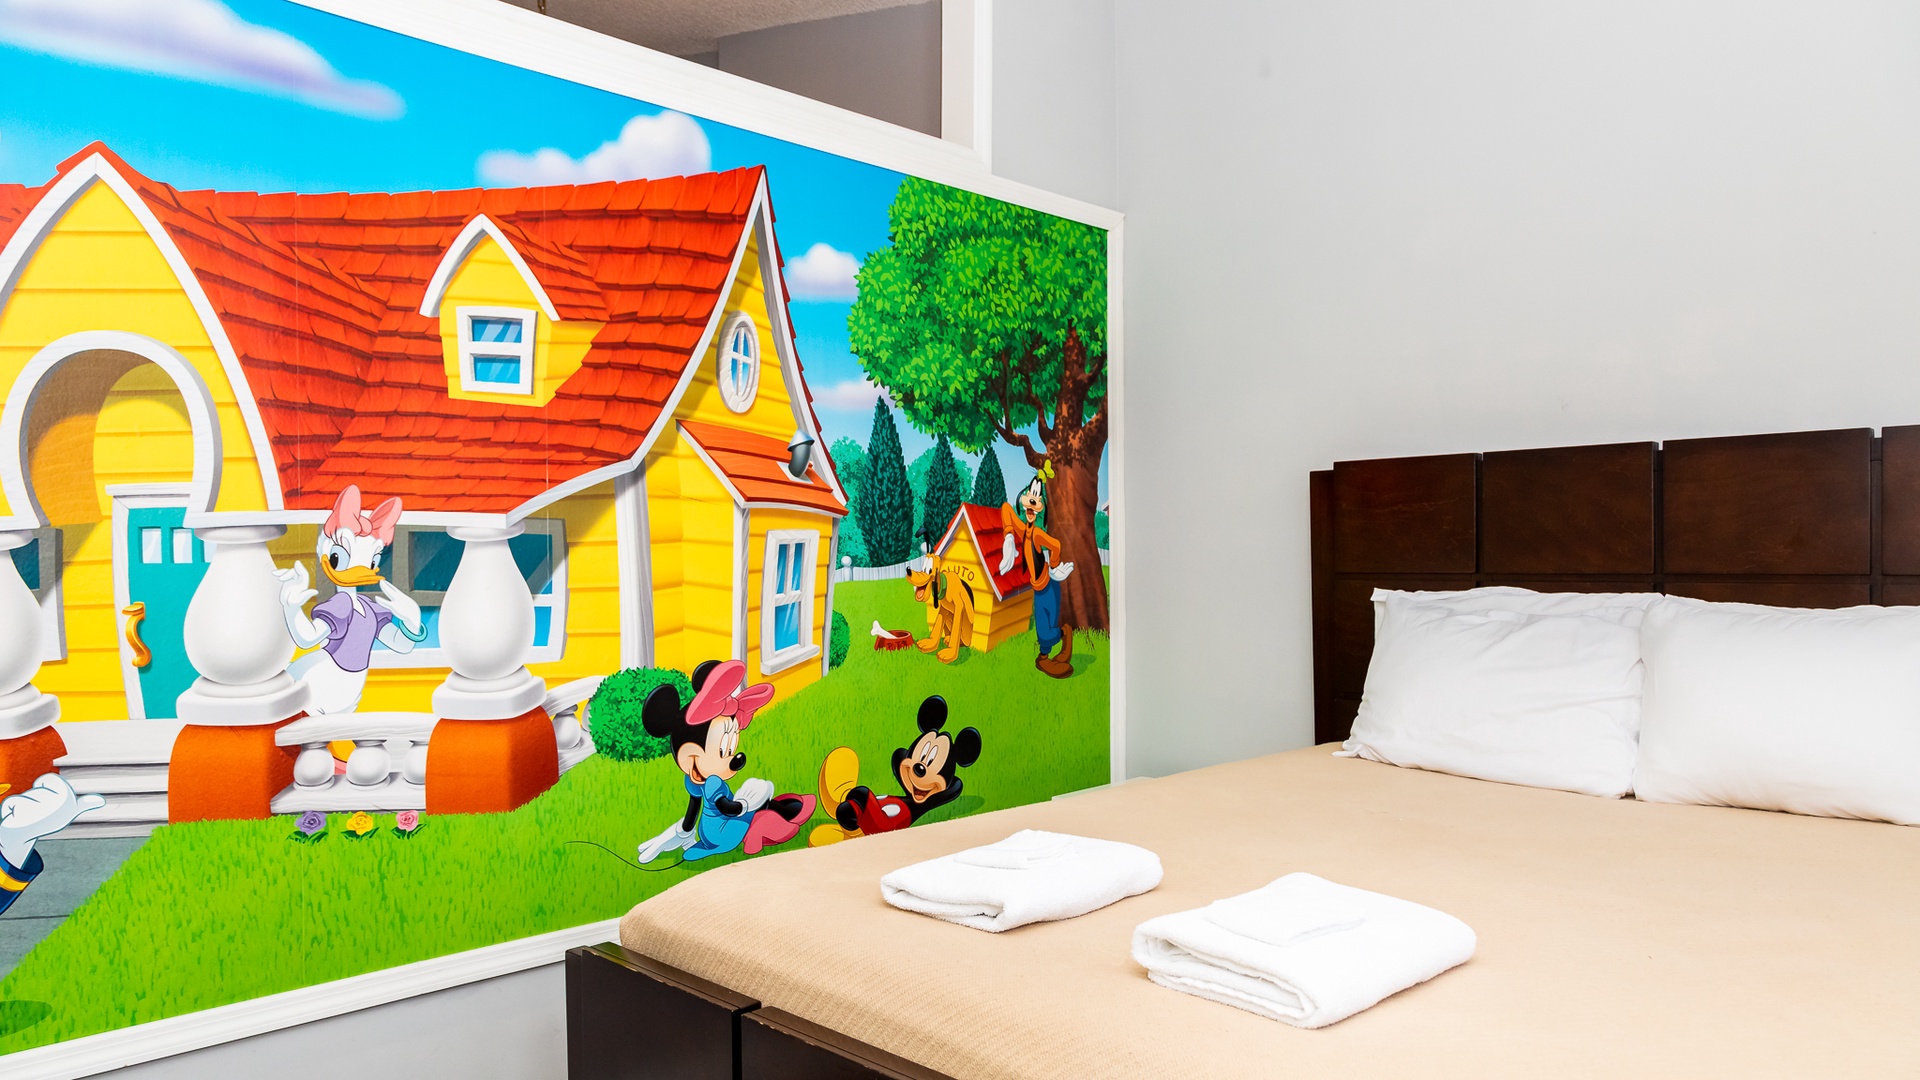 Bedroom #4 - Mickey Mouse & Friends themed with Queen bed